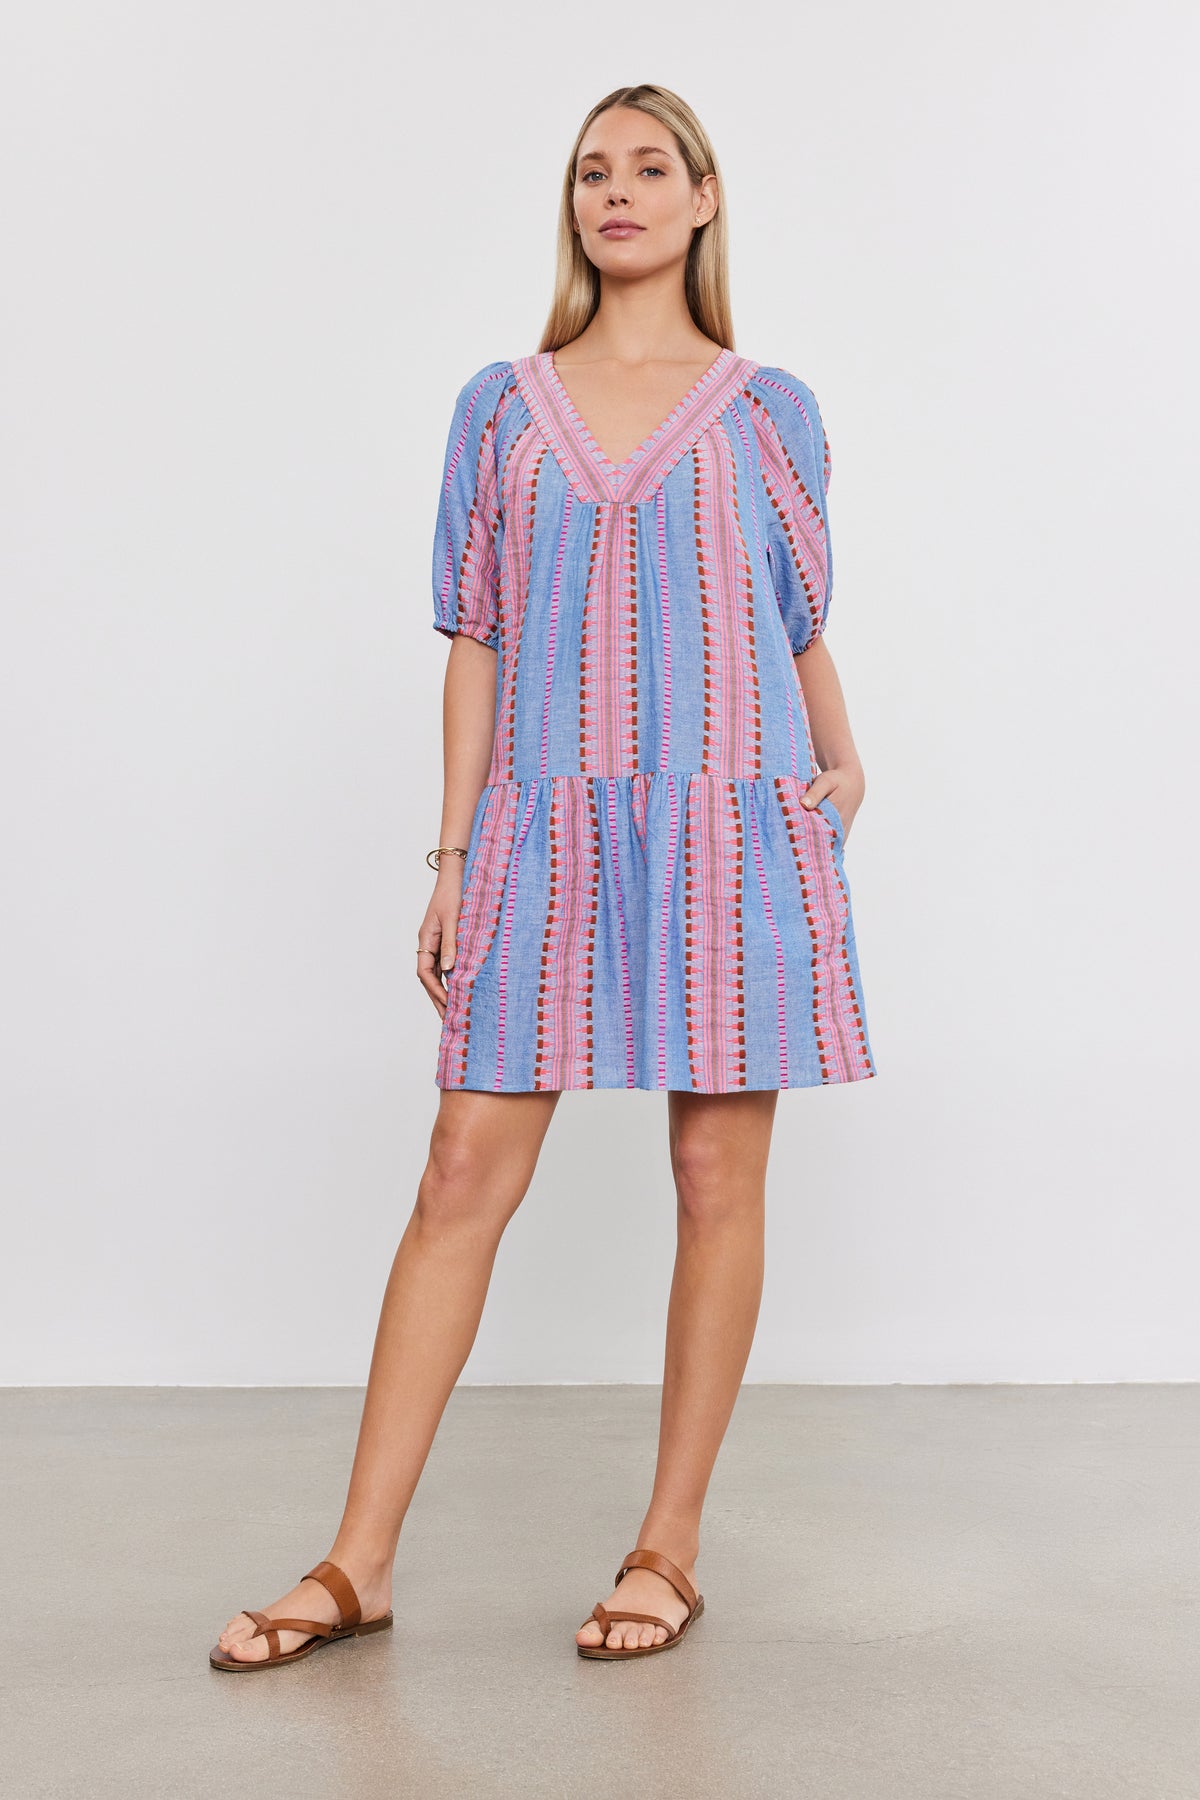   A woman in a ZOELLE DRESS by Velvet by Graham & Spencer with a v-neckline and sandals stands against a plain white background. 